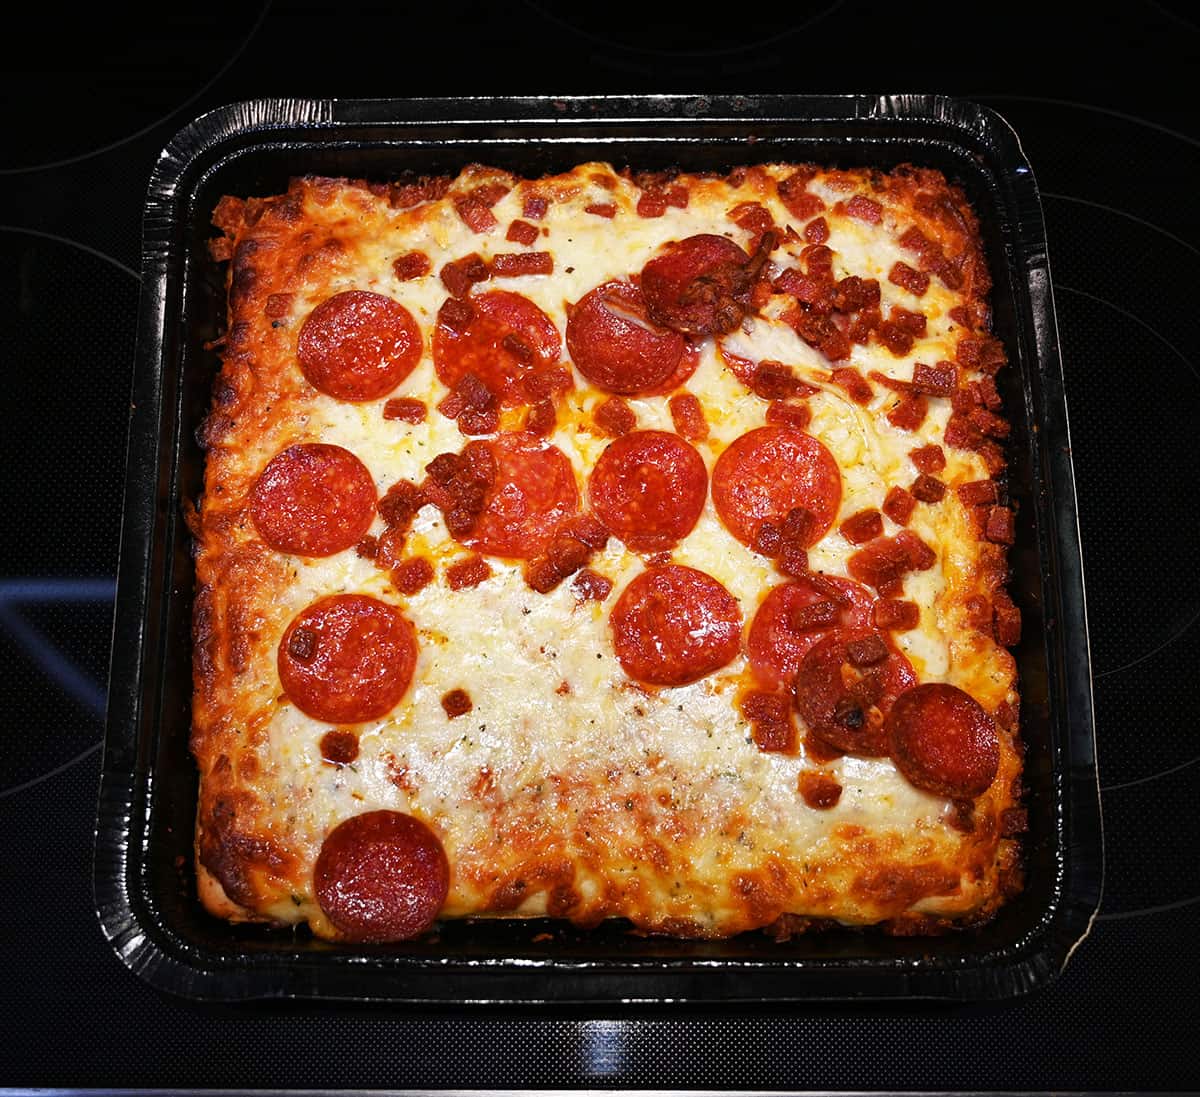 Top down image of the pizza cooked, on an oven stovetop, cooling.